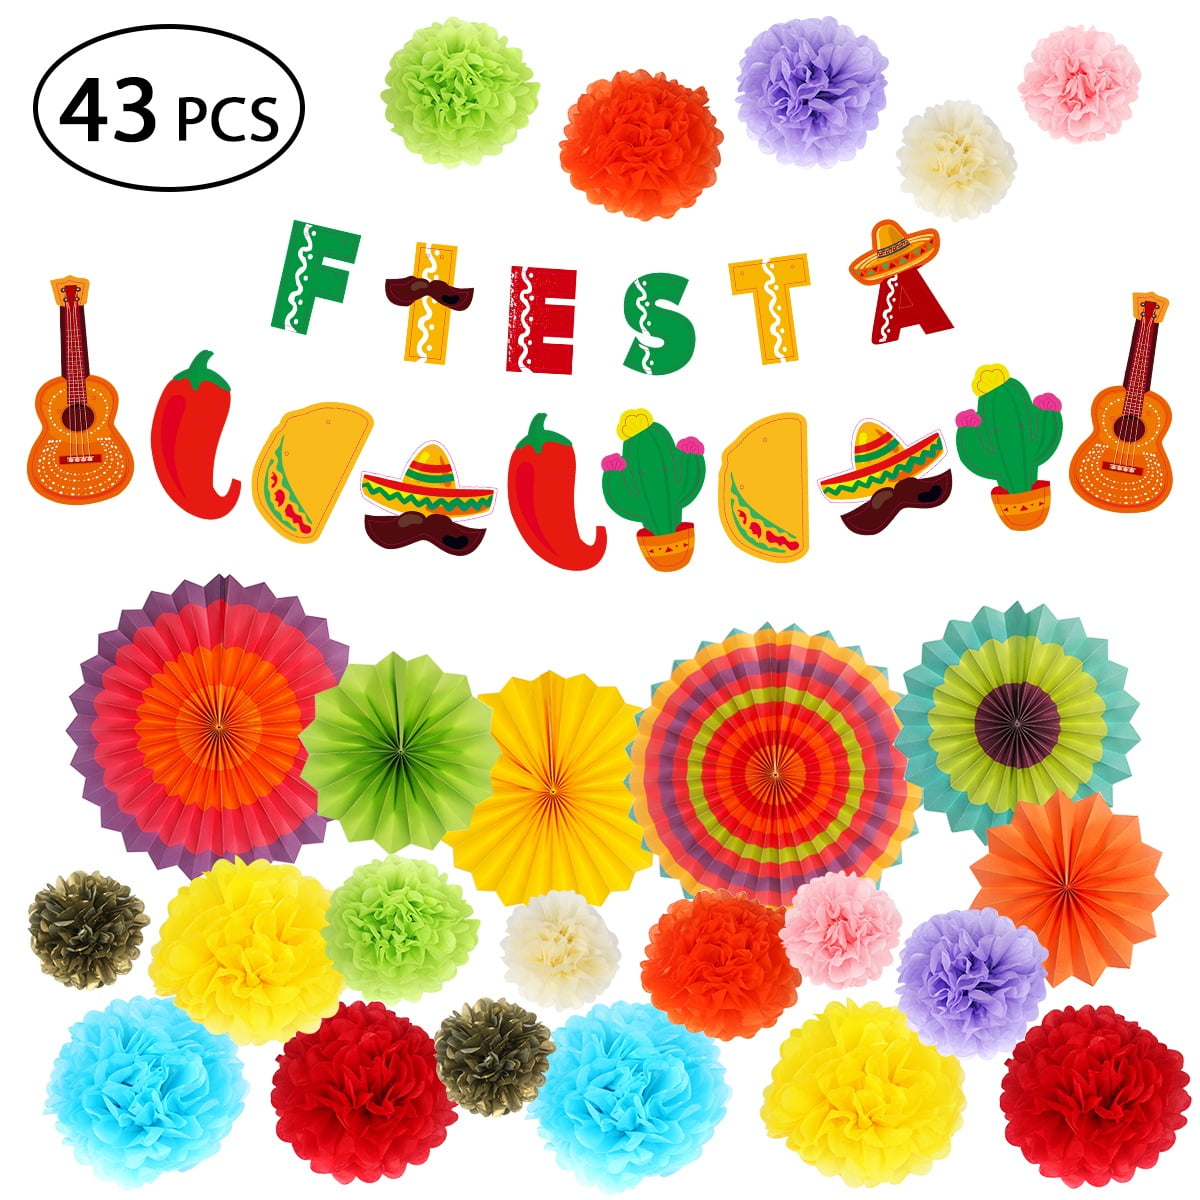 HUAYI 7x5ft Mexican Fiesta Theme Backdrop for Photography Colorful Paper Flowers Festival Birthday Party Decor Cinco De Mayo Carnival Banner Table Photo Background Studio Props W-1959